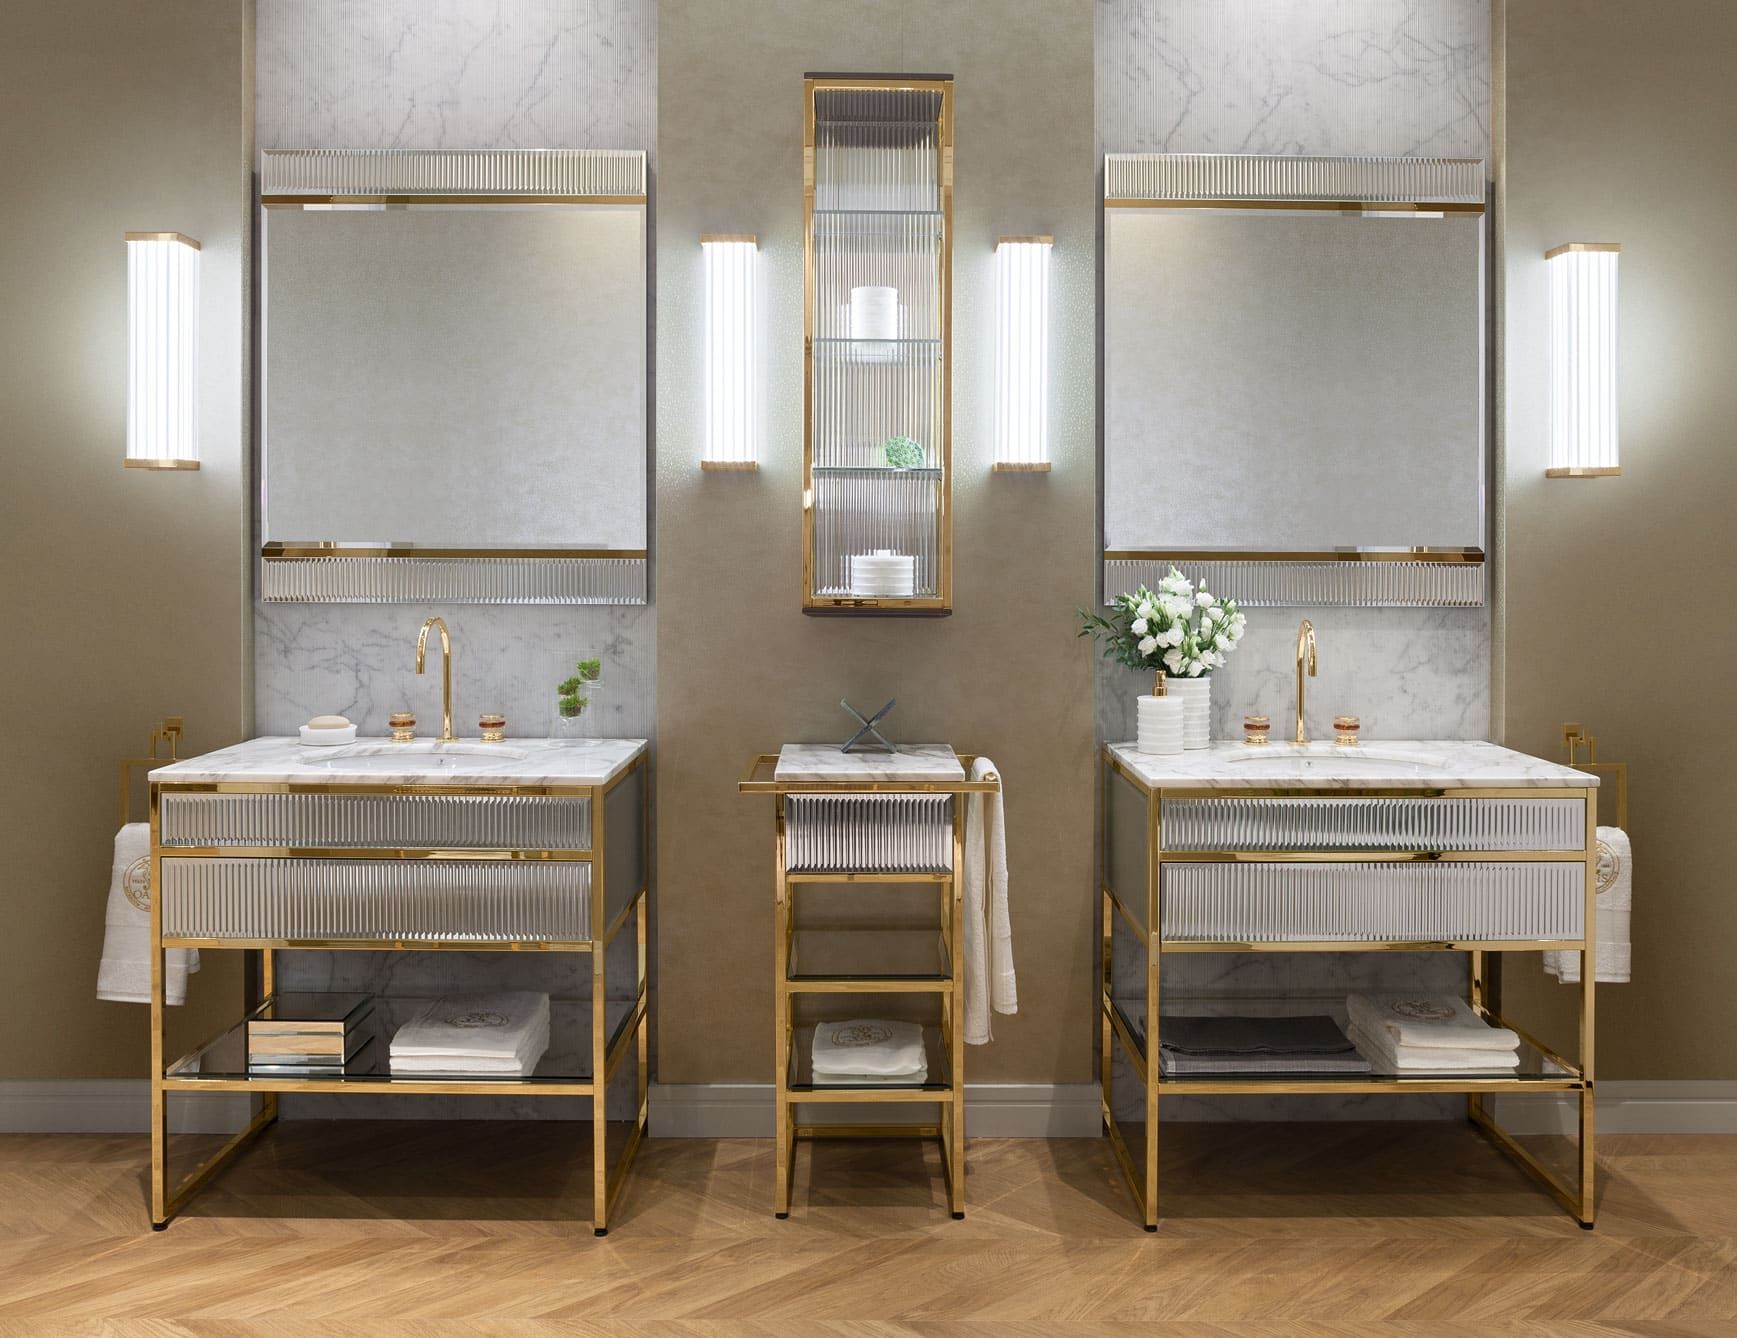 Accademia contemporary Italian bathroom vanity with crystal mirrored glass